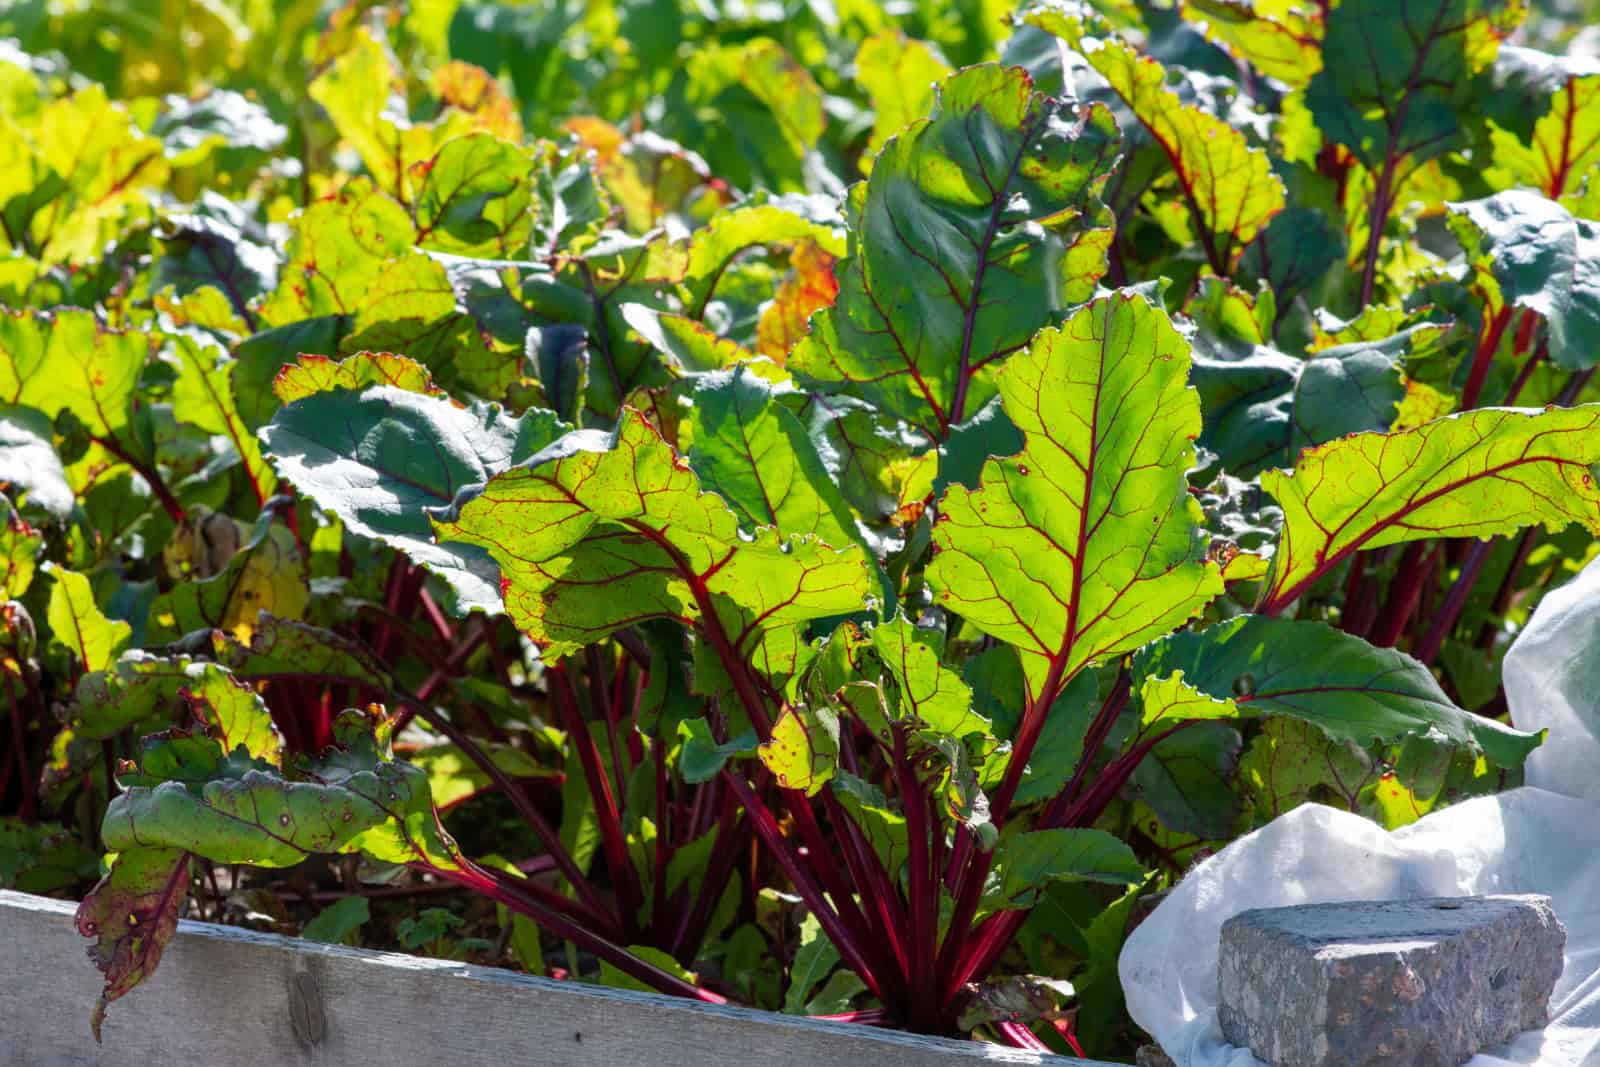 A bunch of Swiss chard and beets with bright green leaves